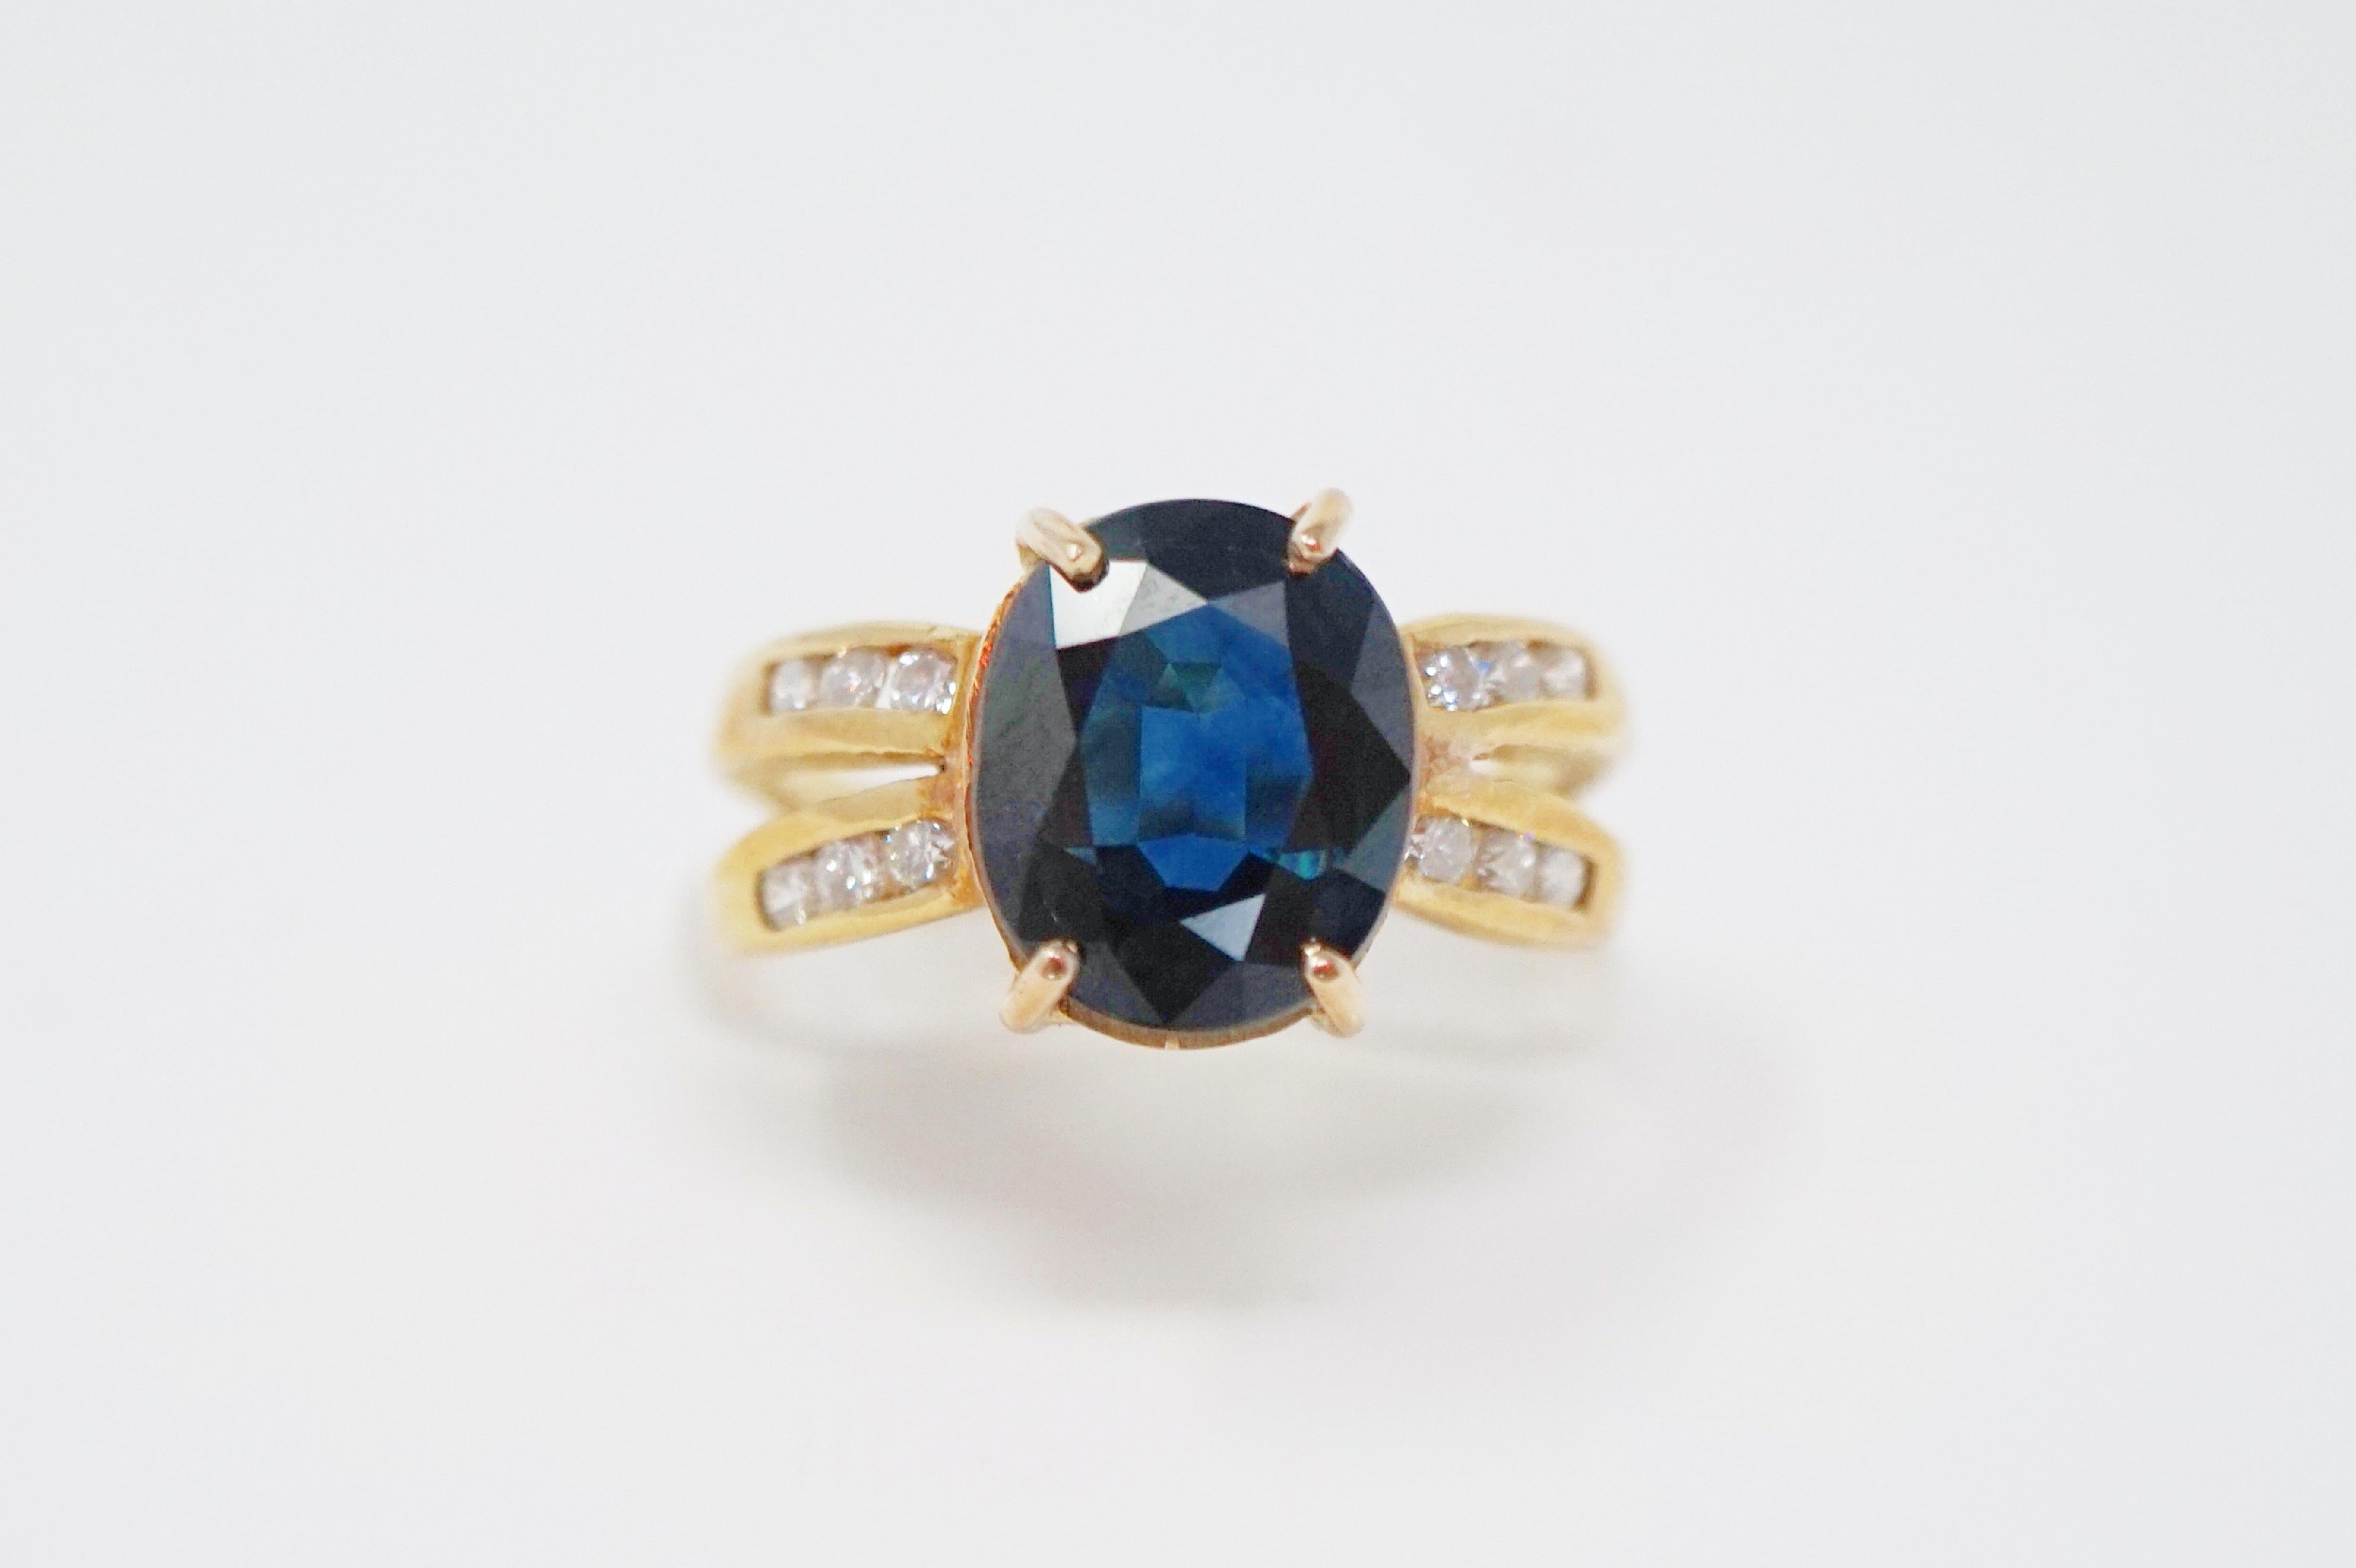 2.85 Carat Oval Cut Sapphire 14 Karat Gold Engagement Ring with ...